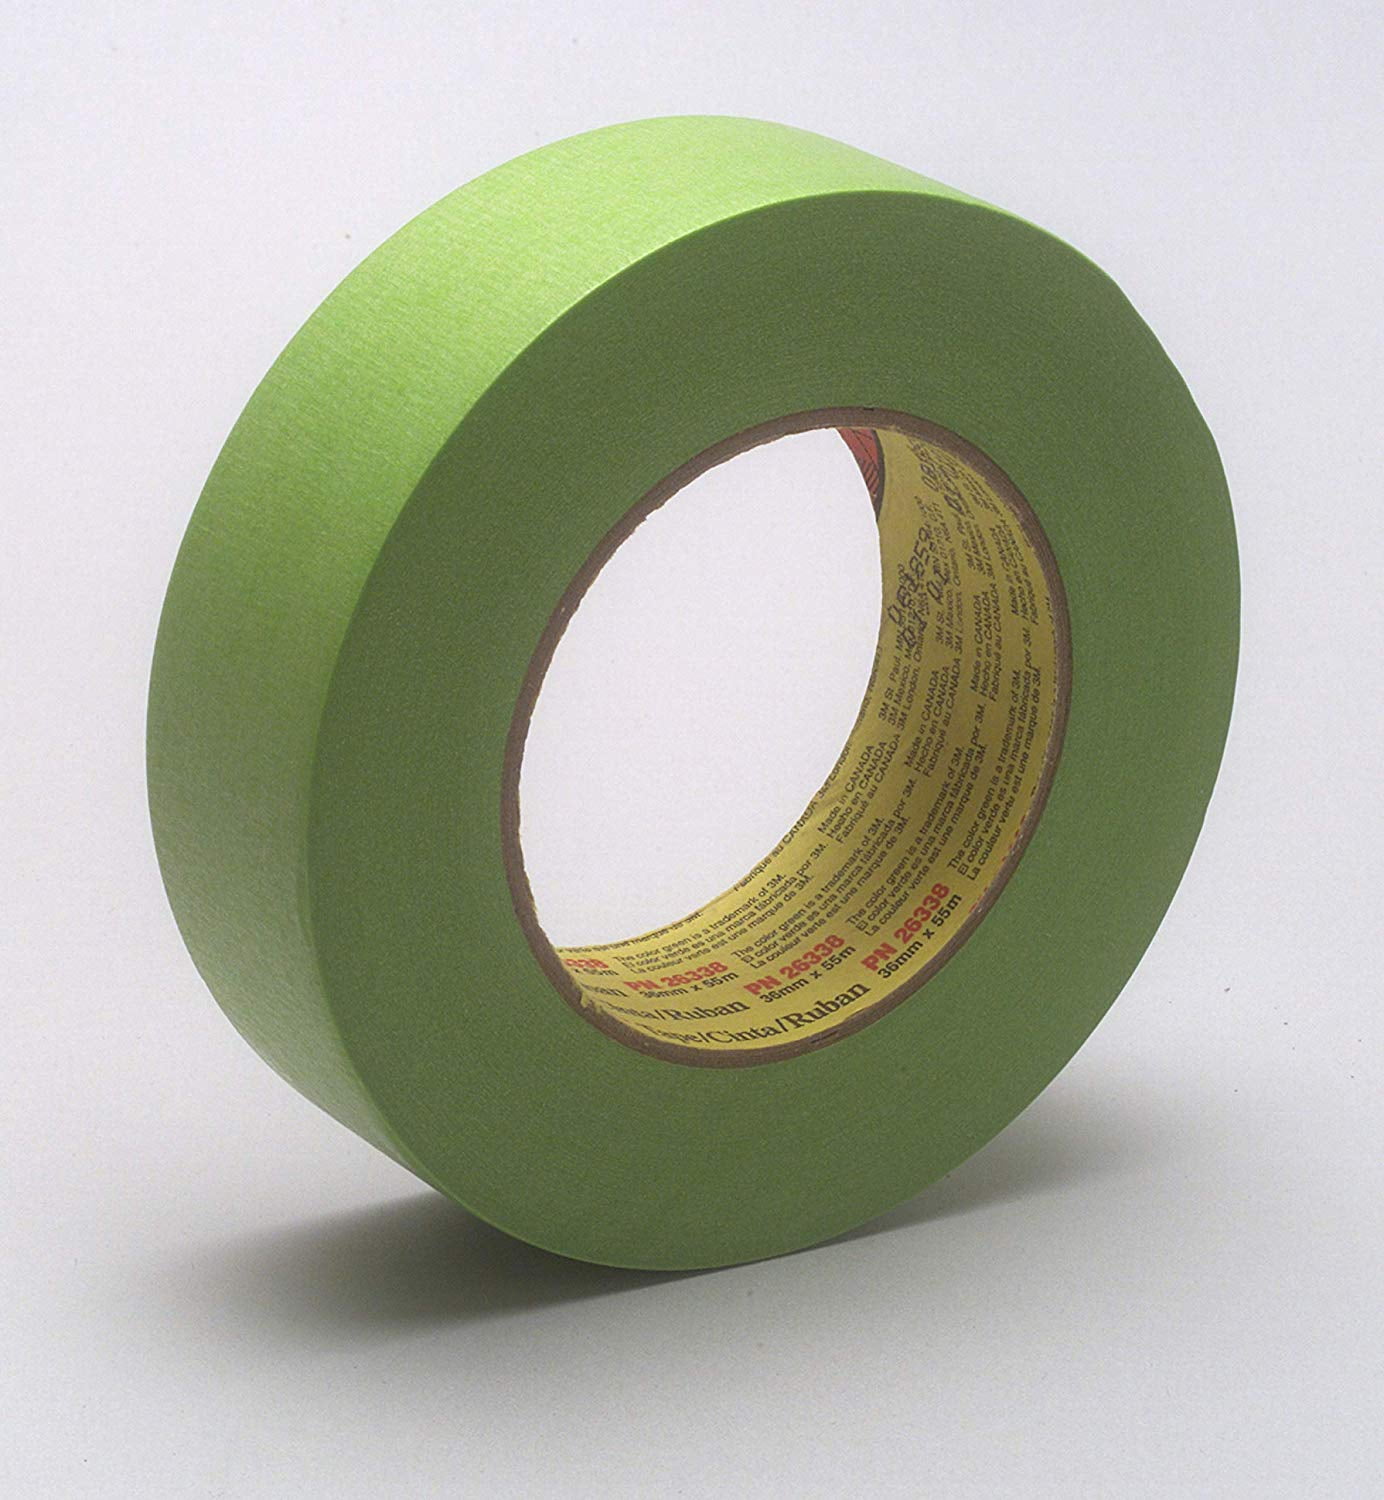  BOMEI PACK Green Painters Tape 2 Inch Wide, Medium